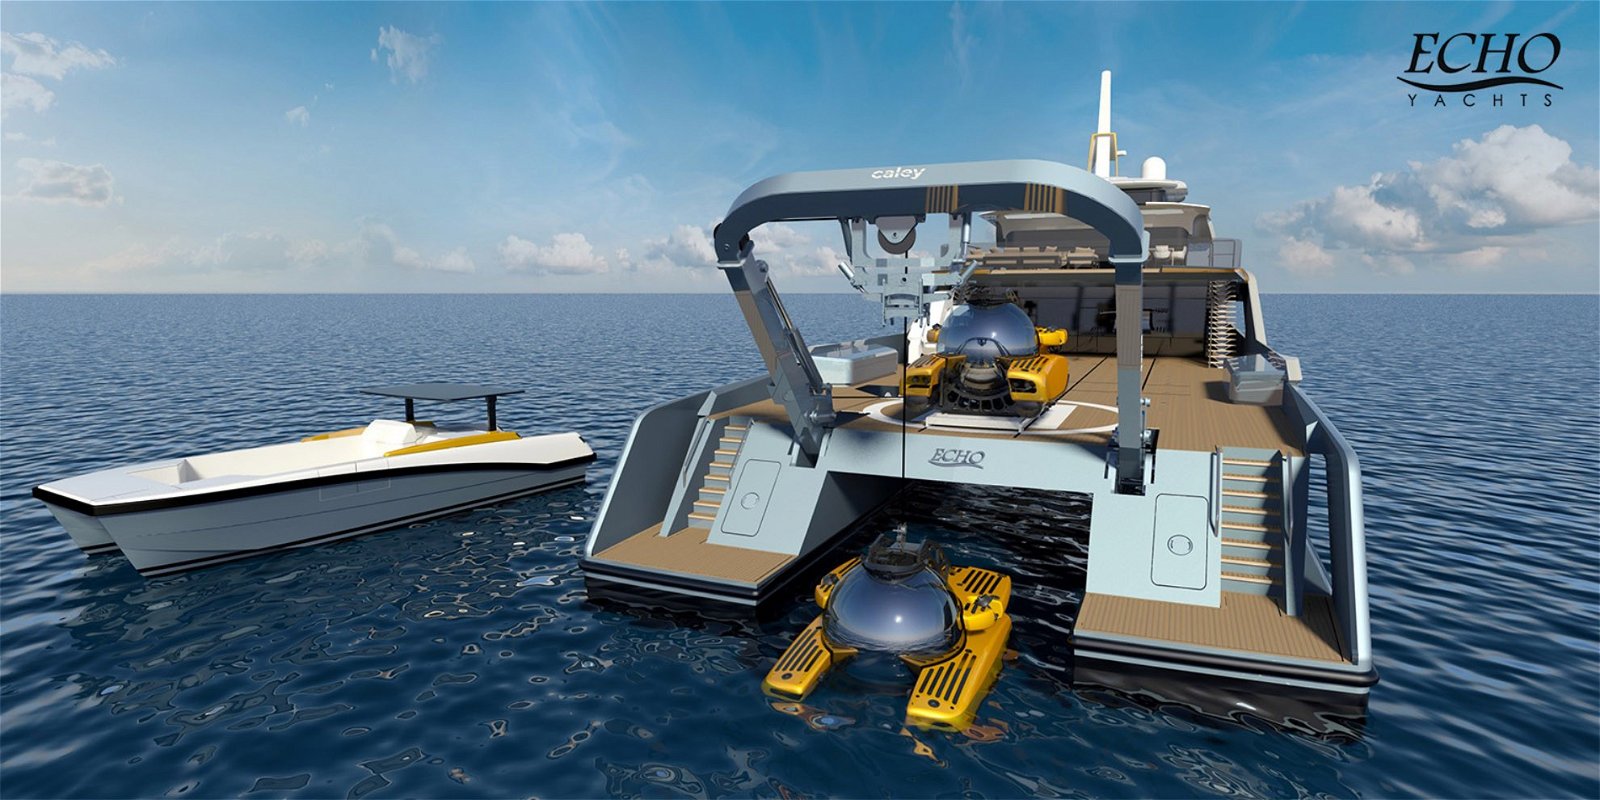 3 - Project Echo by Echo Yachts